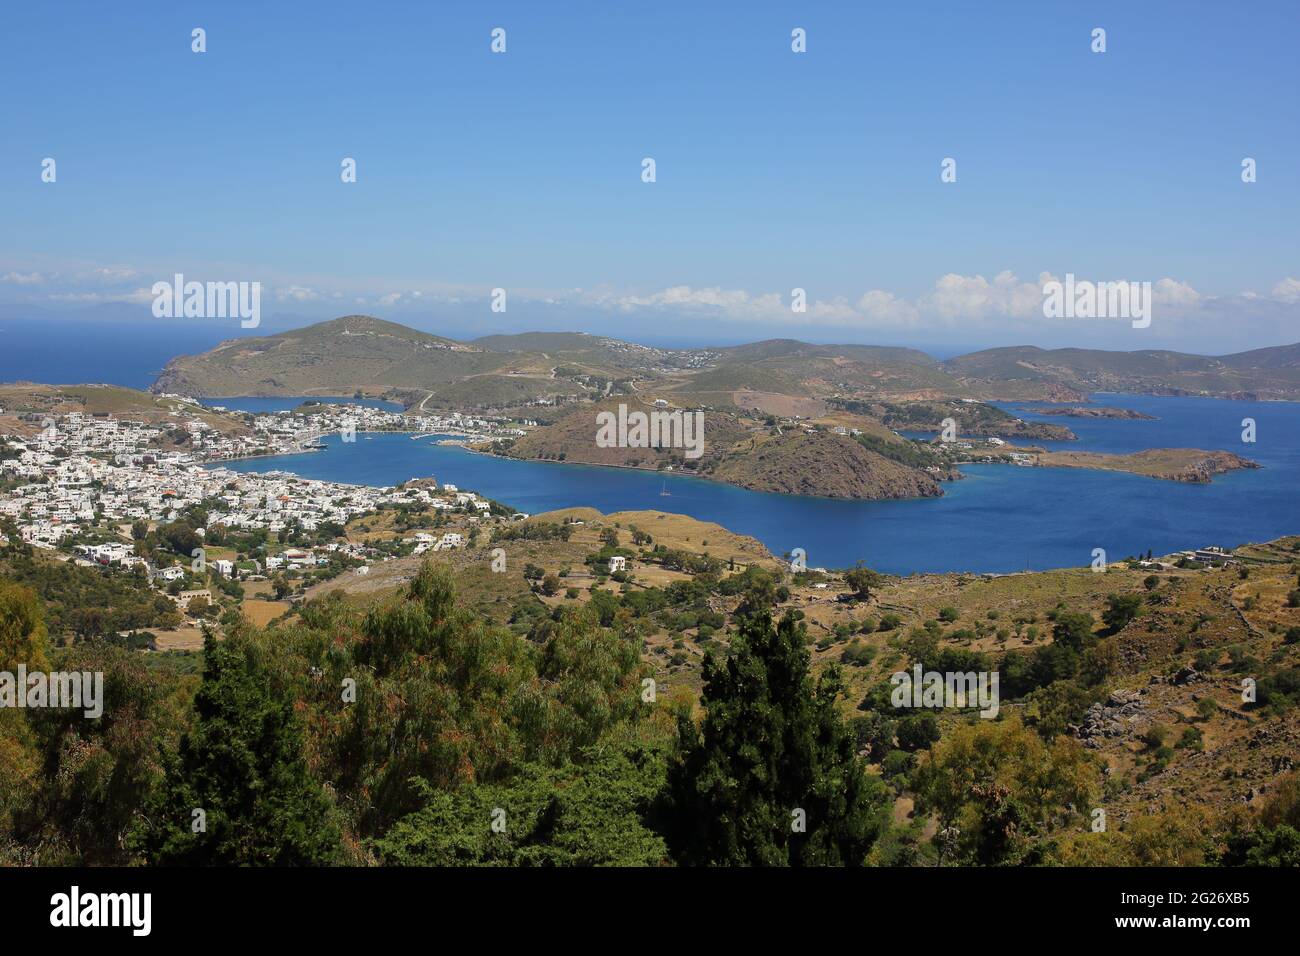 Aerial/Landscape view of Skala harbor and town, Patmos Island, Greece Stock Photo